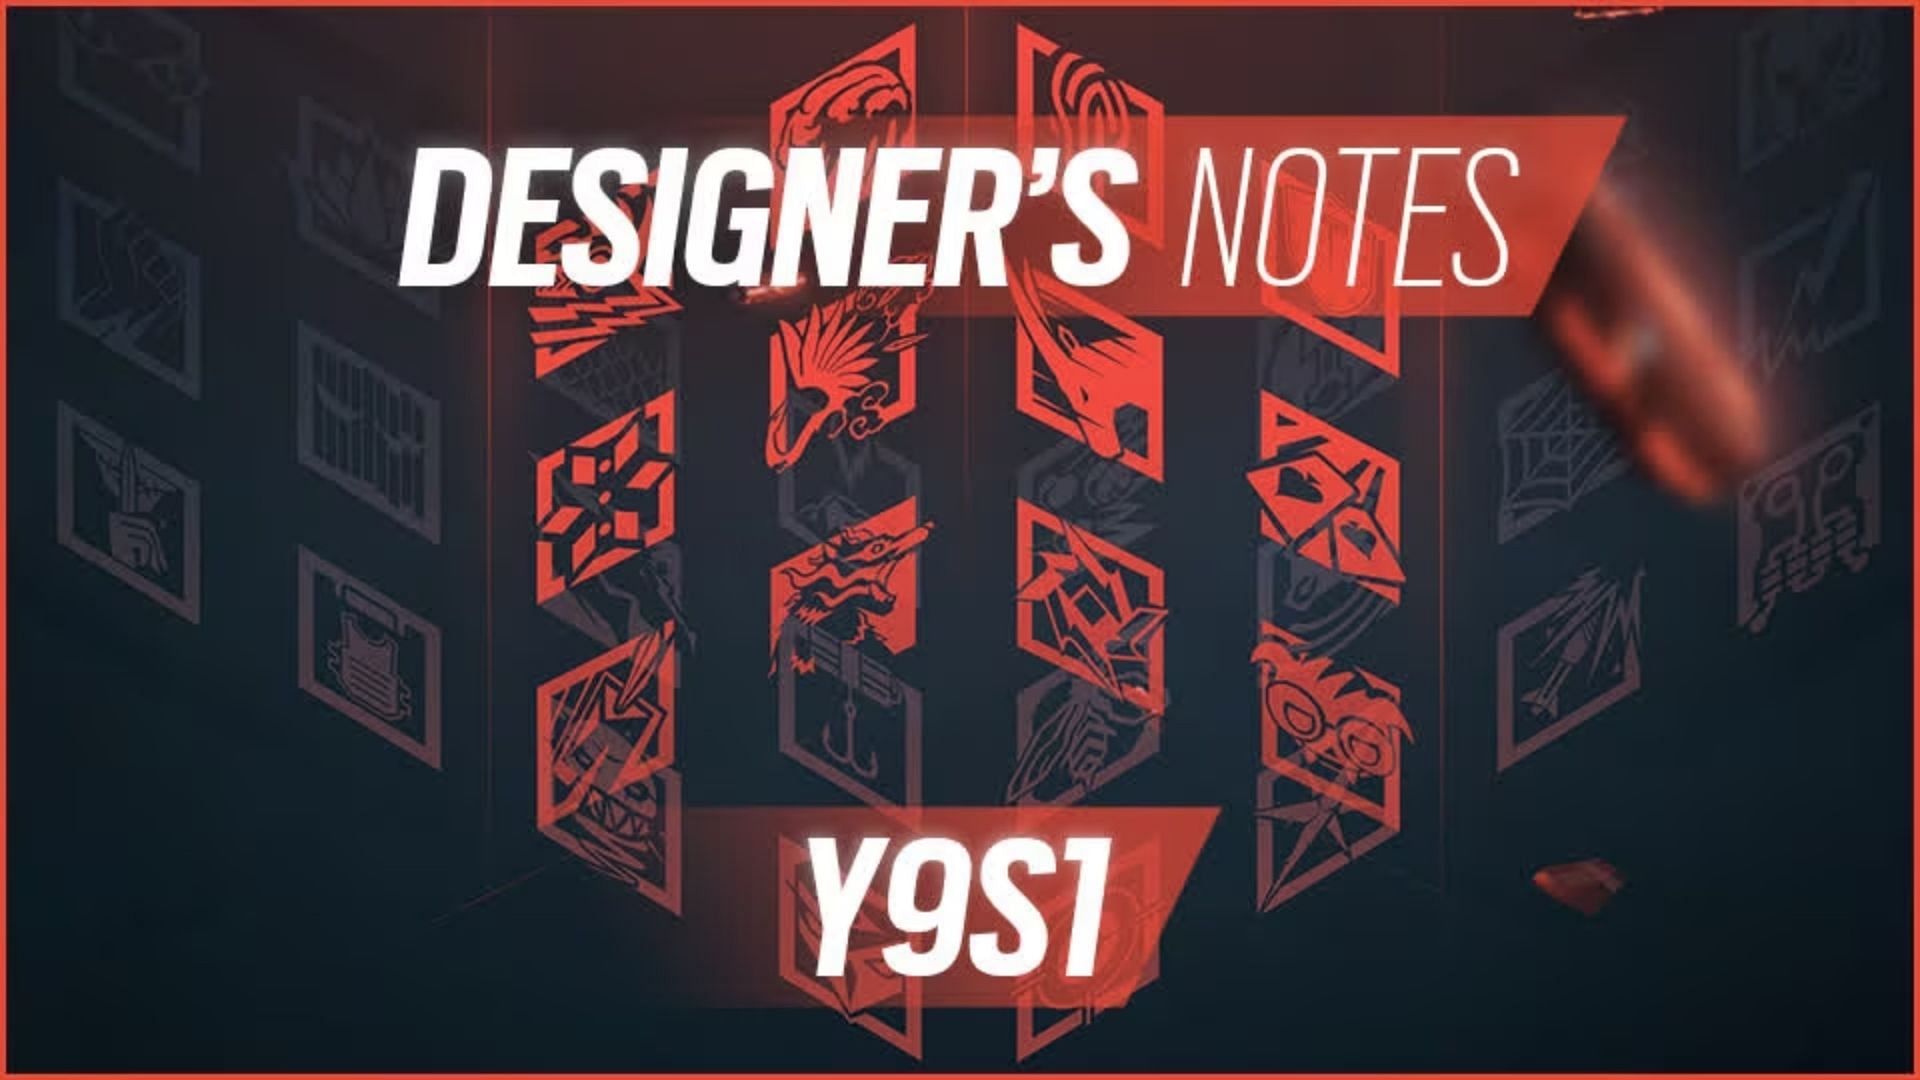 Rainbow Six Siege Y9S1 patch notes